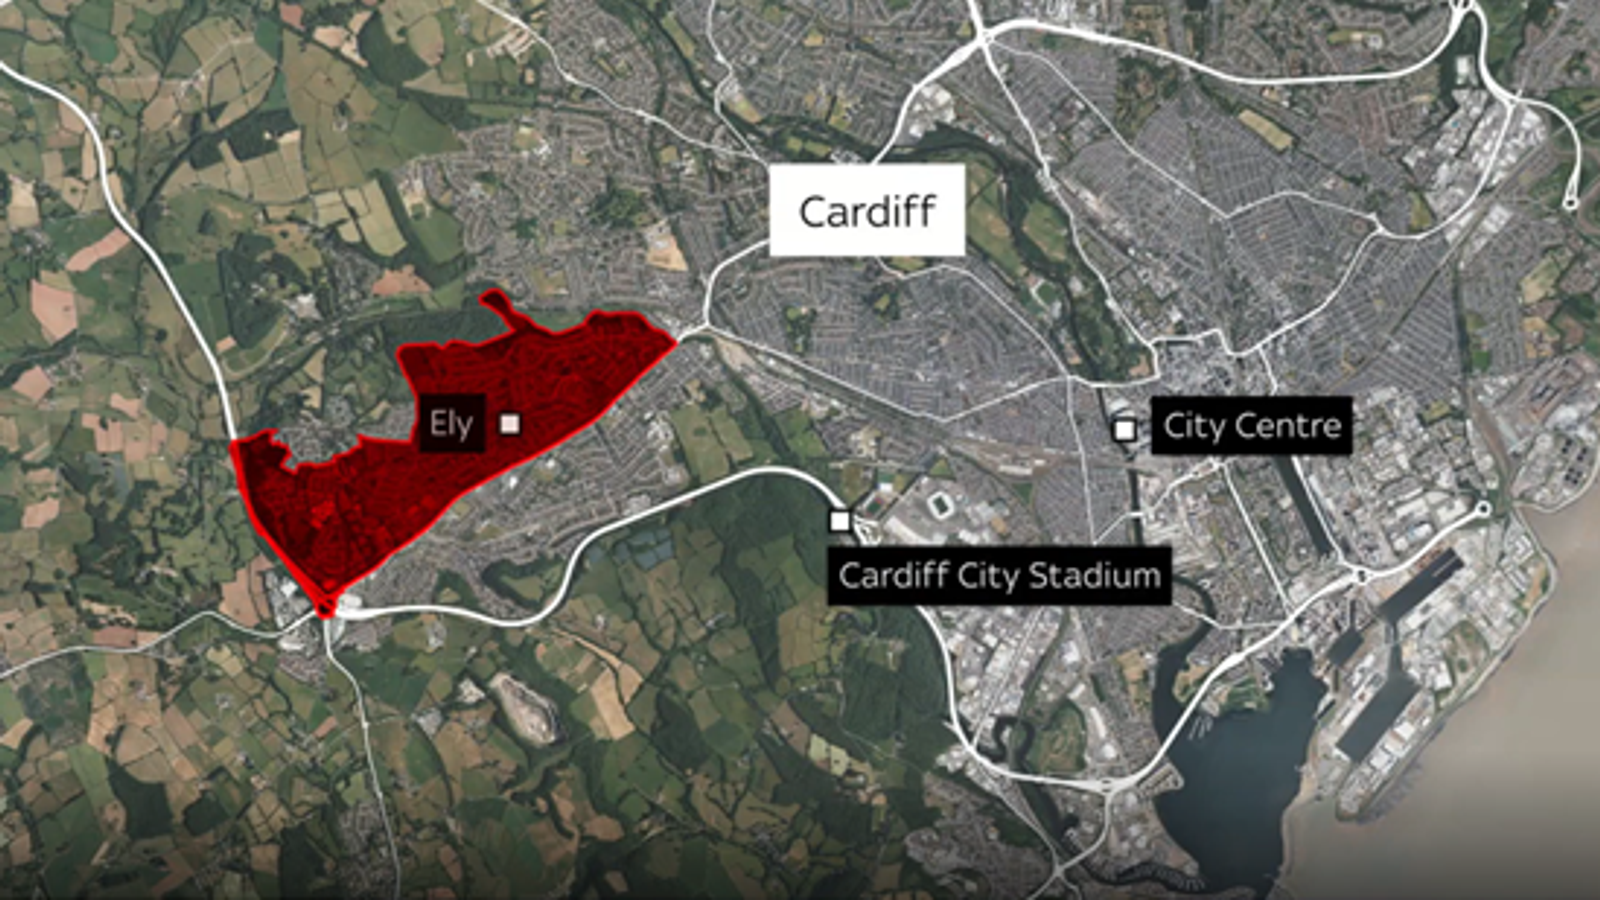 Timeline of events before fatal crash in Cardiff which was followed by riots